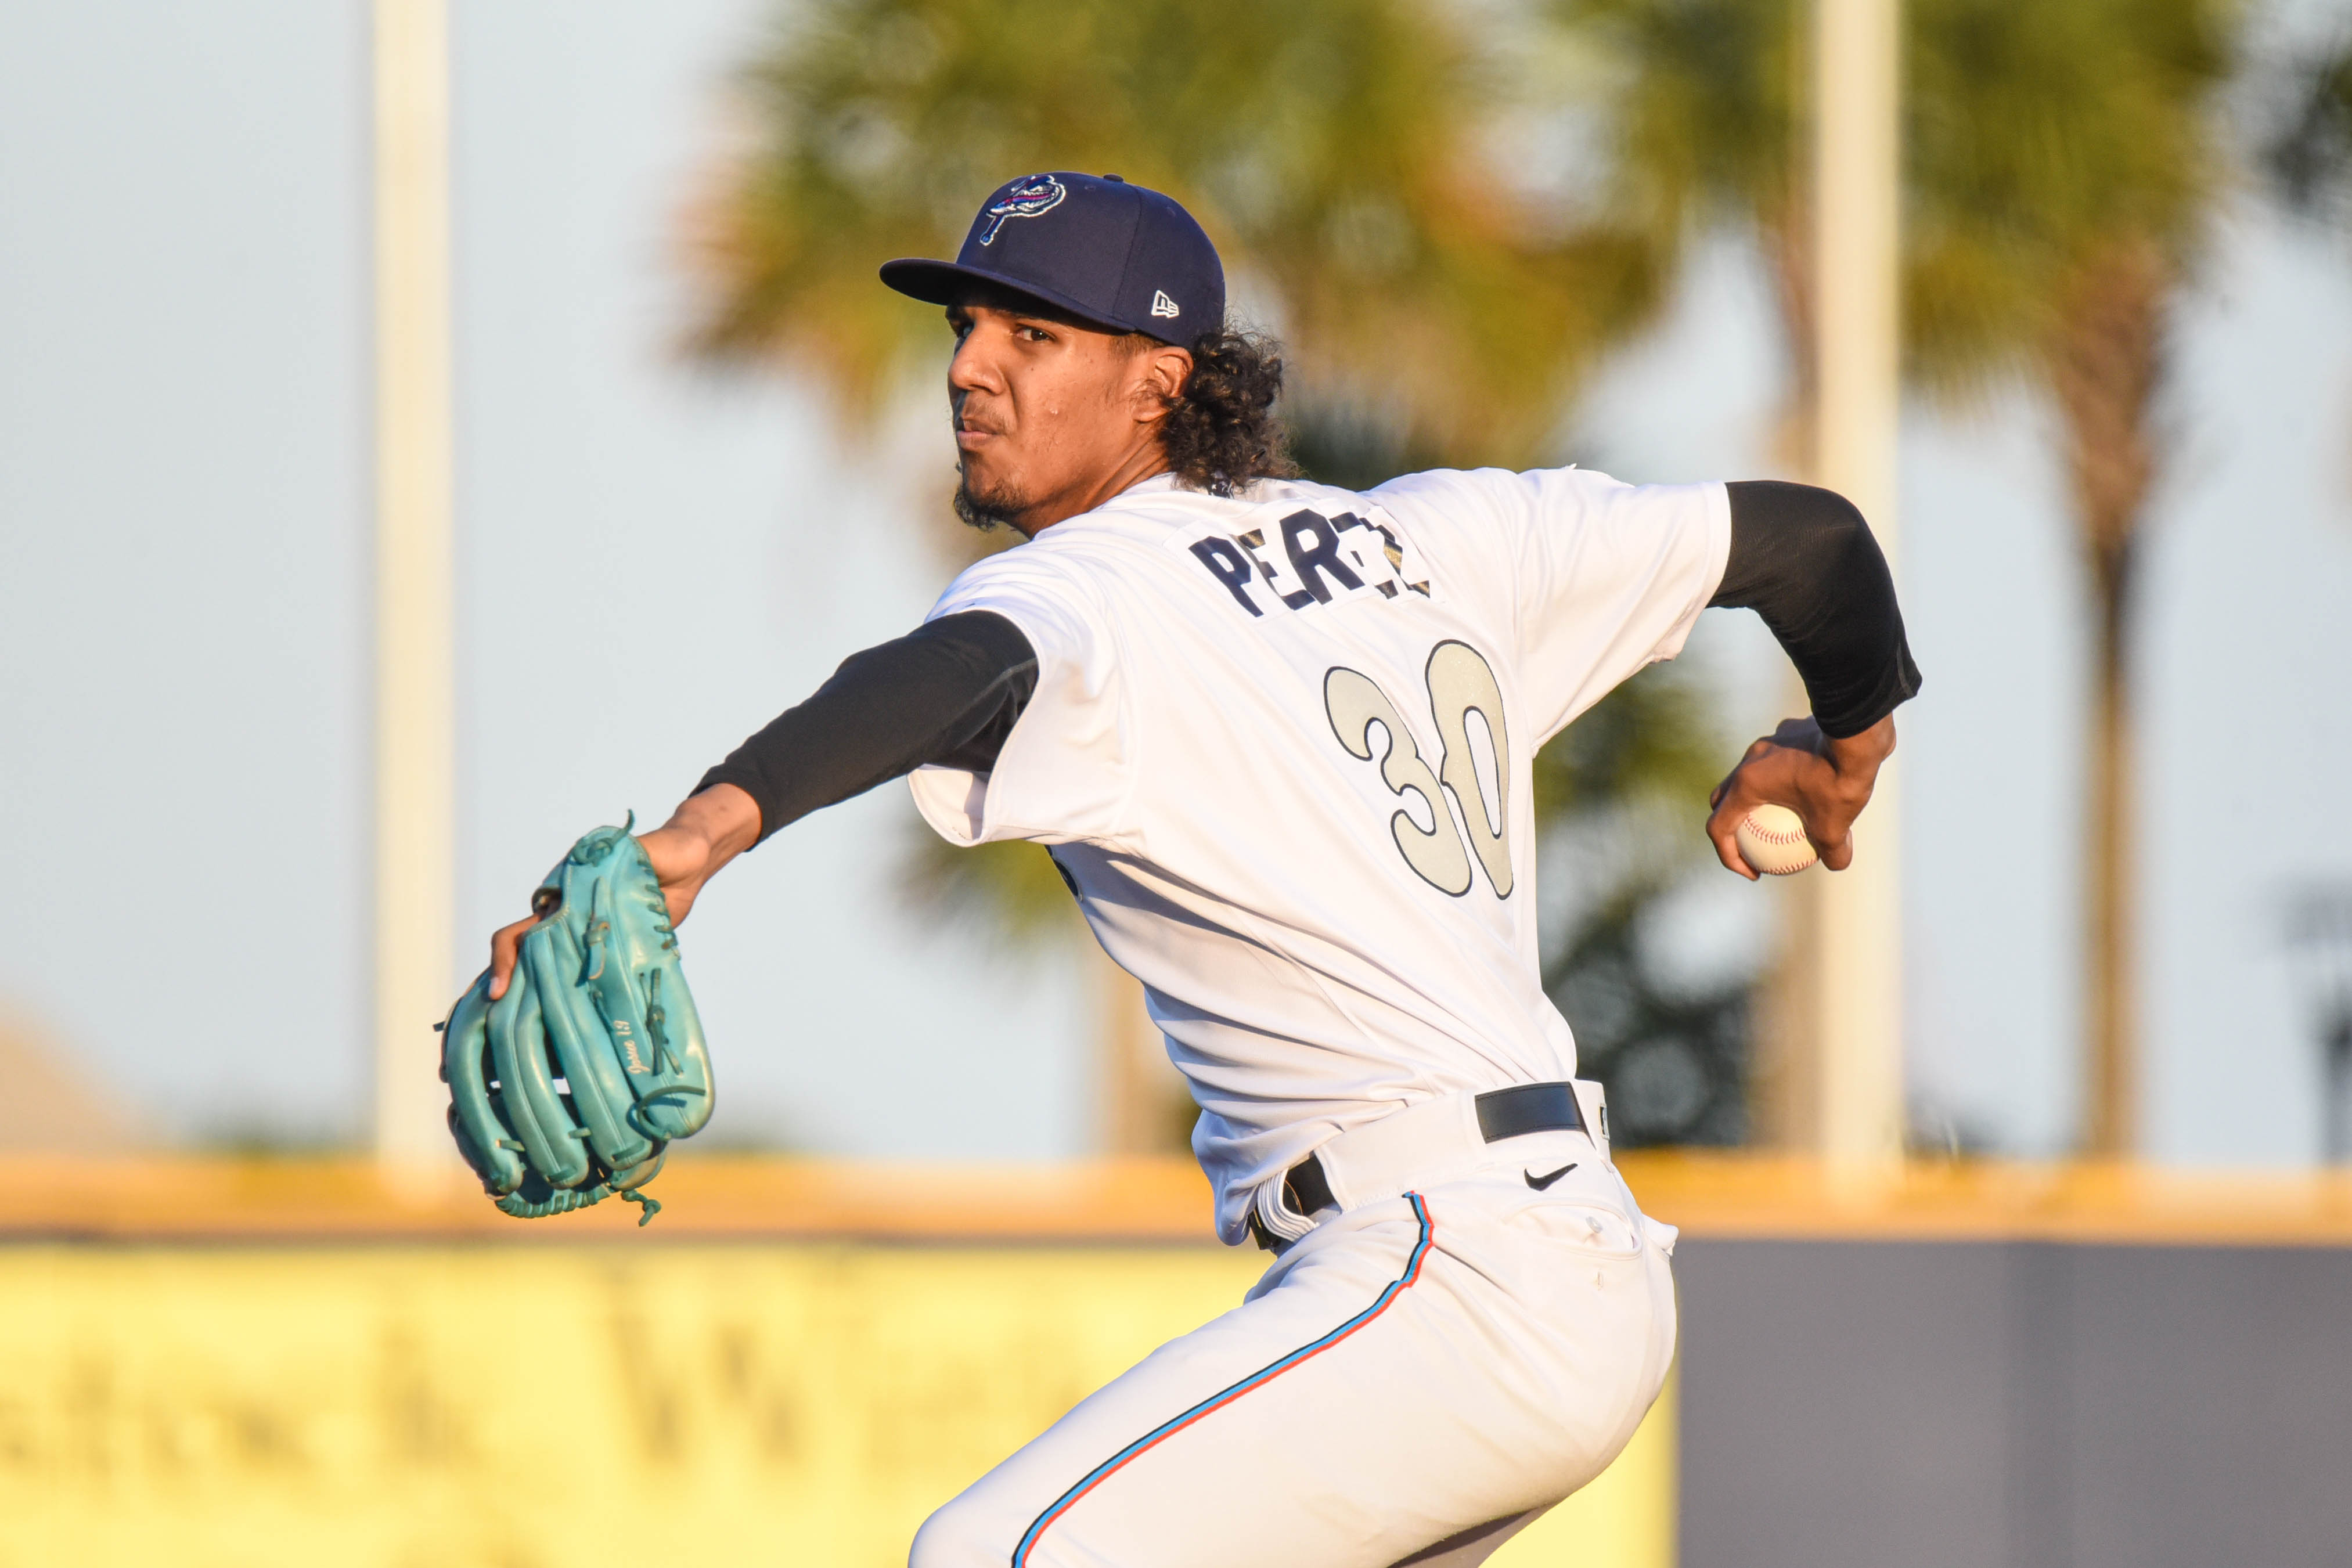 Marlins right-handed pitcher Eury Pérez pitching for the Double-A Pensacola Blue Wahoos at Blue Wahoos Stadium